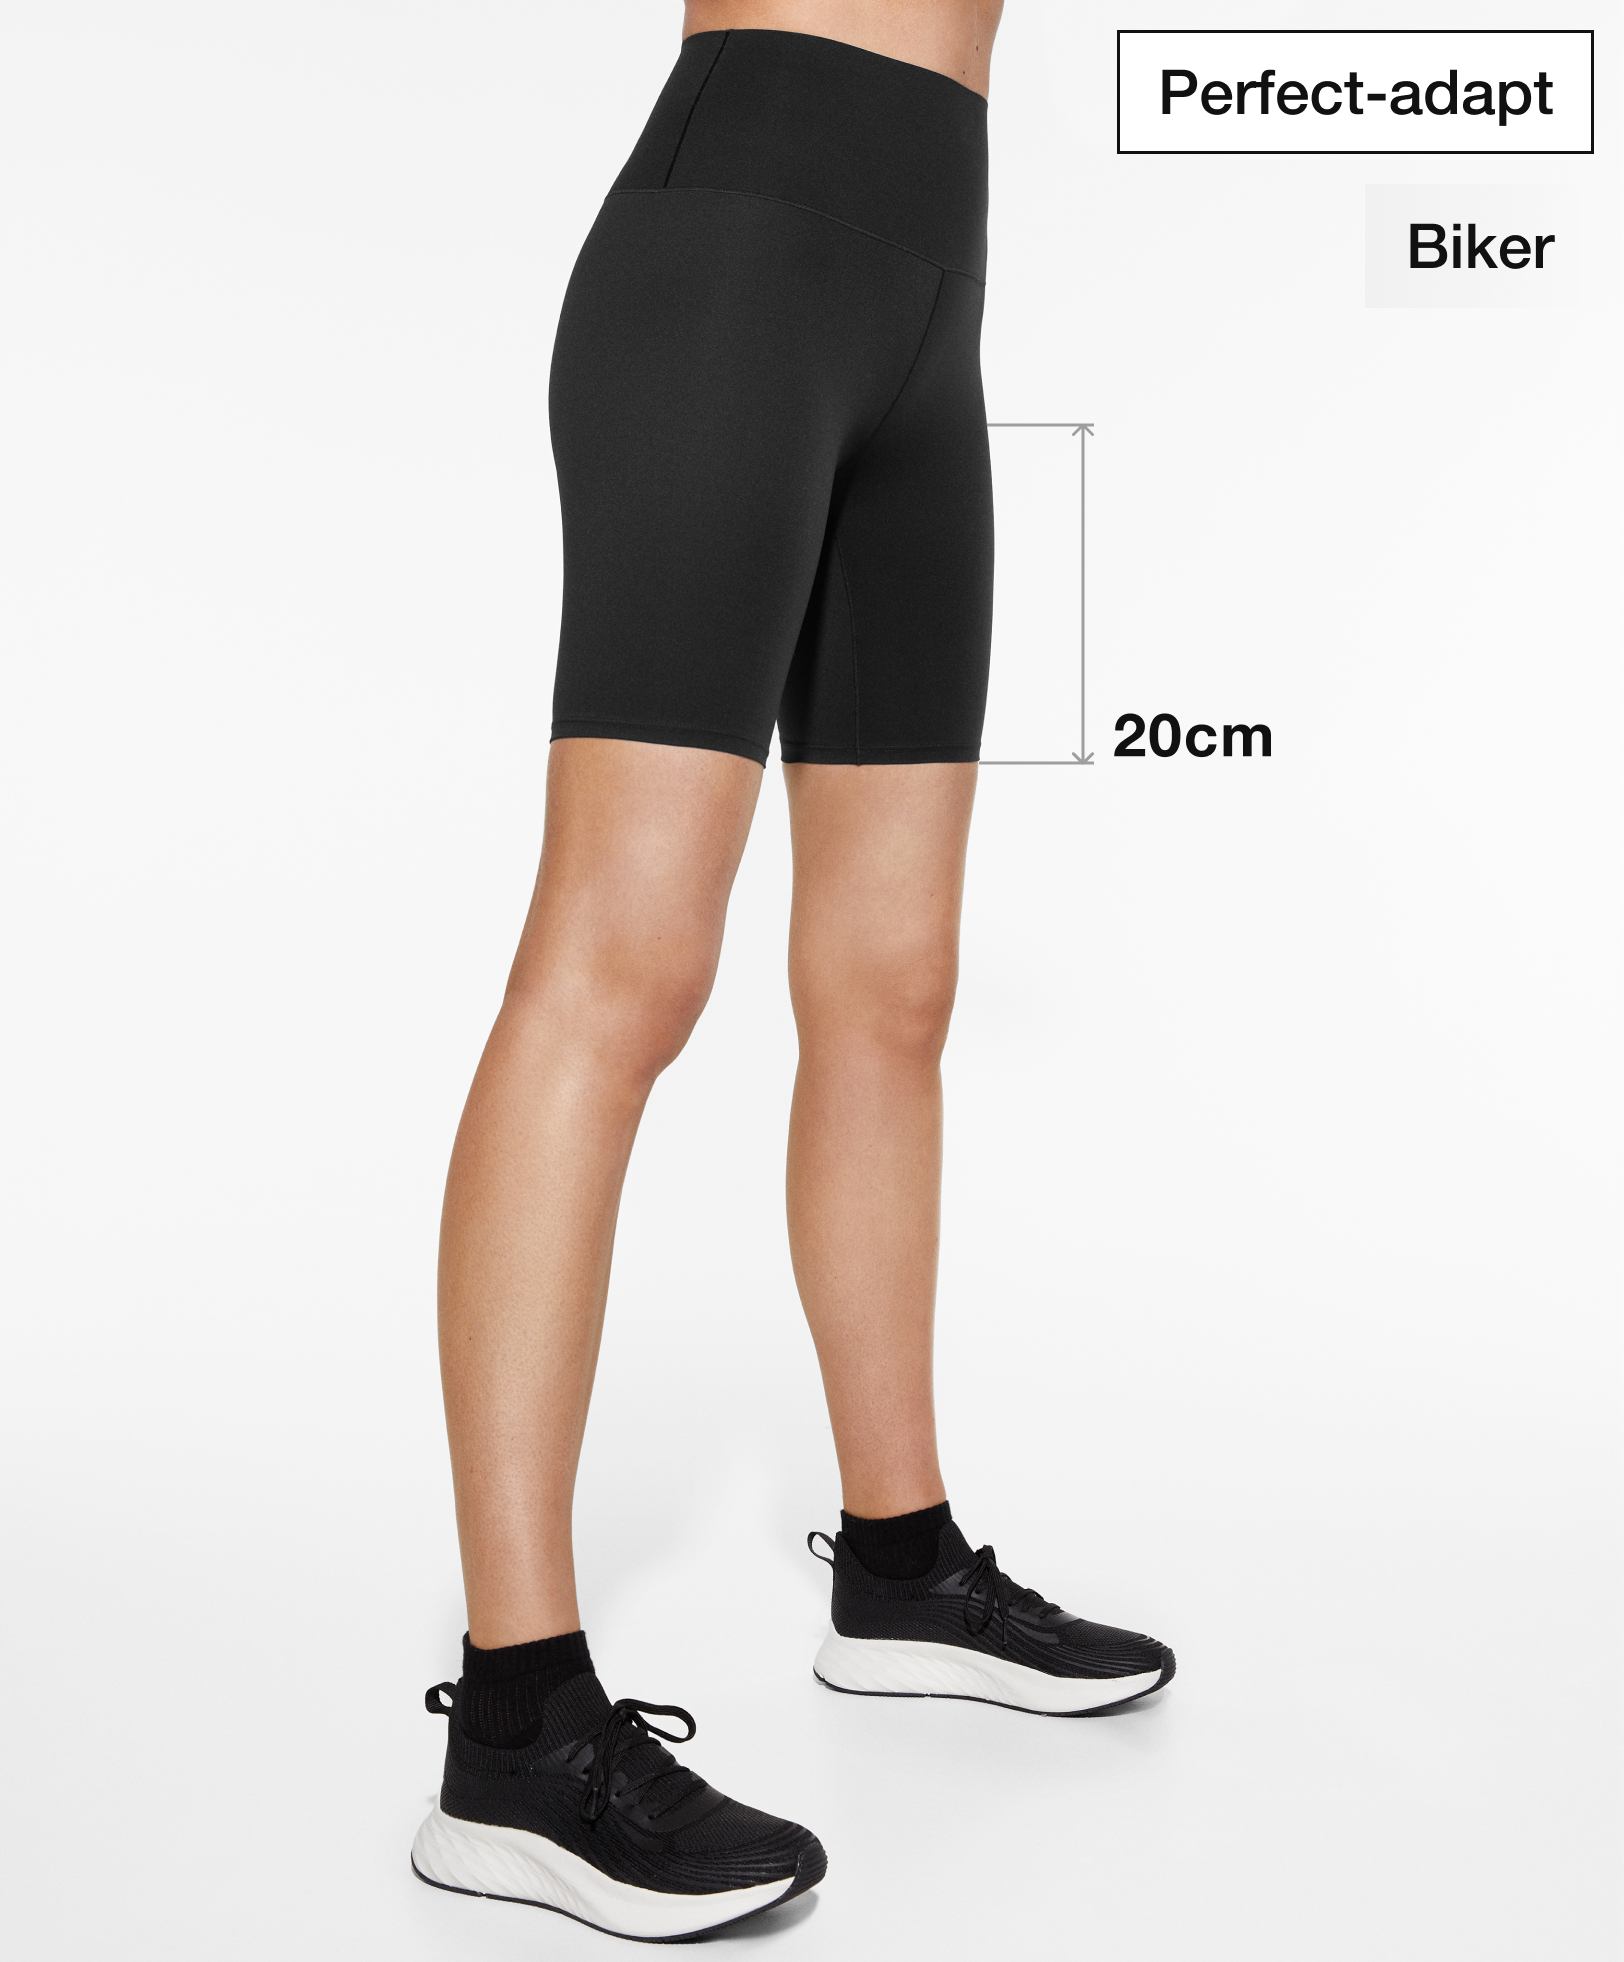 Perfect-adapt high-rise 20cm cycle shorts